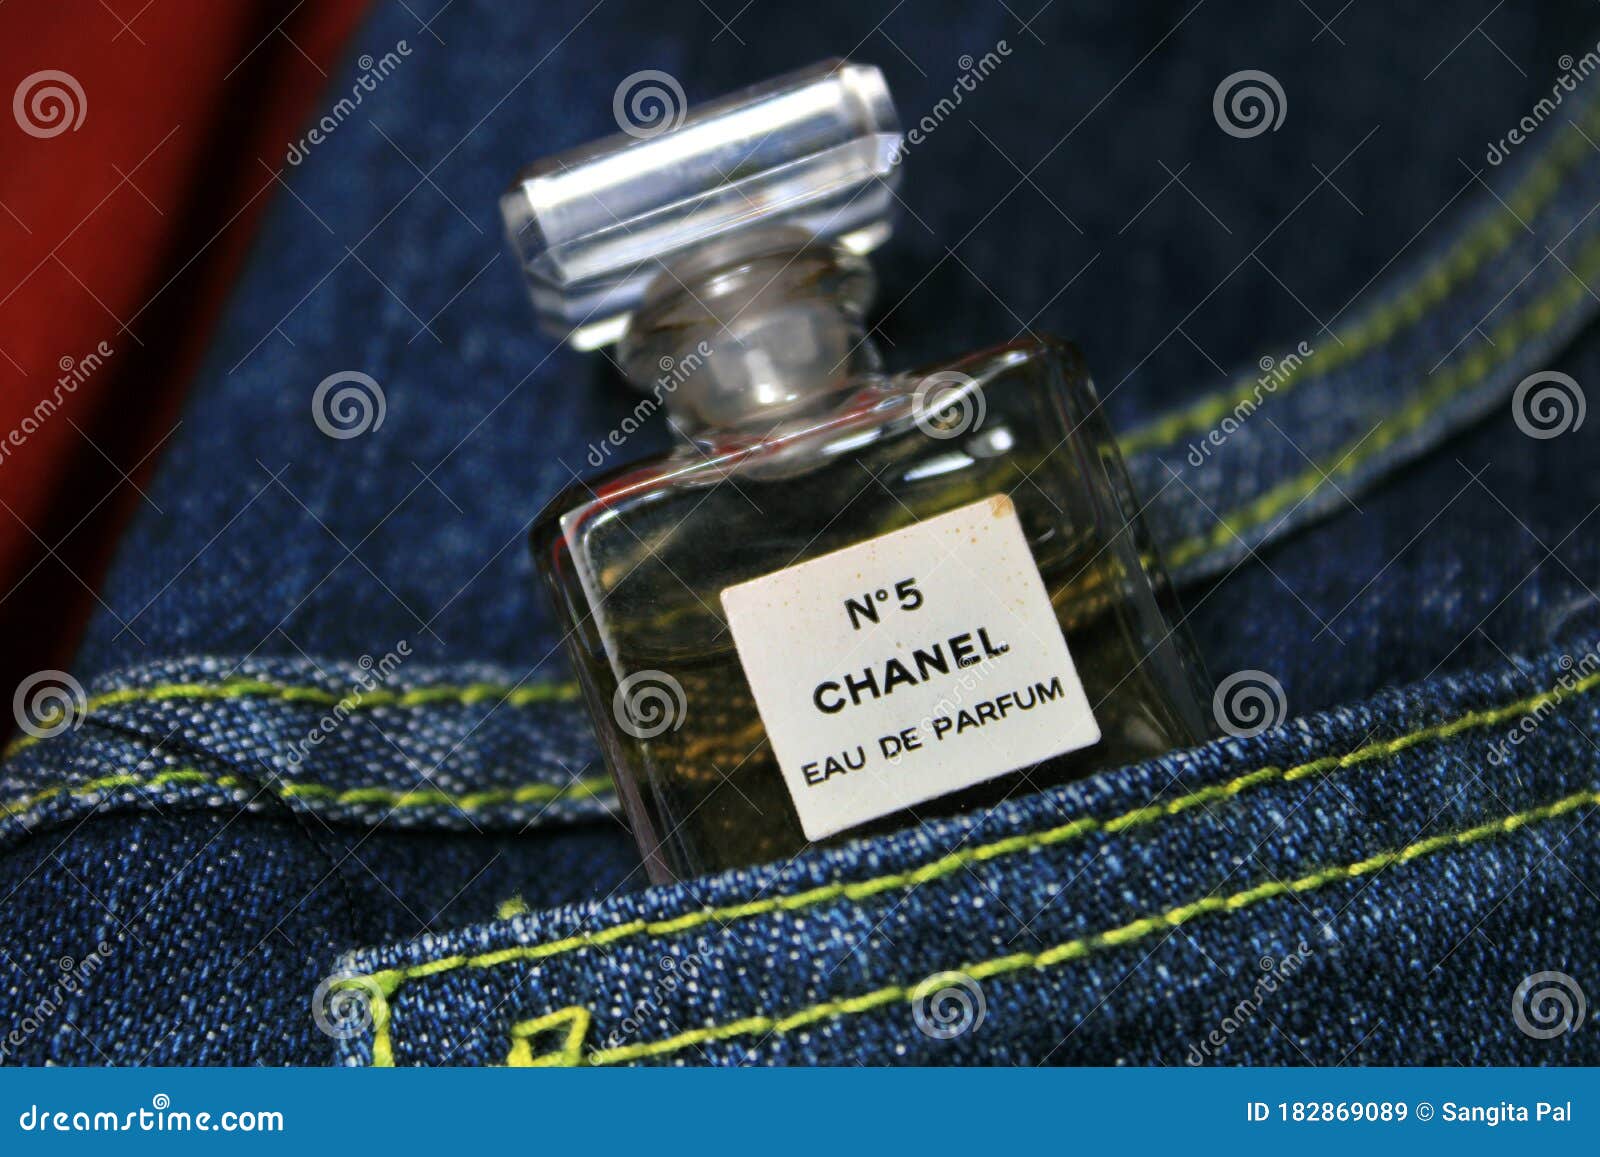 Chanel Perfume Bottles in a Pocket of Blue Jeans. French Perfume. Editorial  Stock Image - Image of aromatic, chanel: 182869089